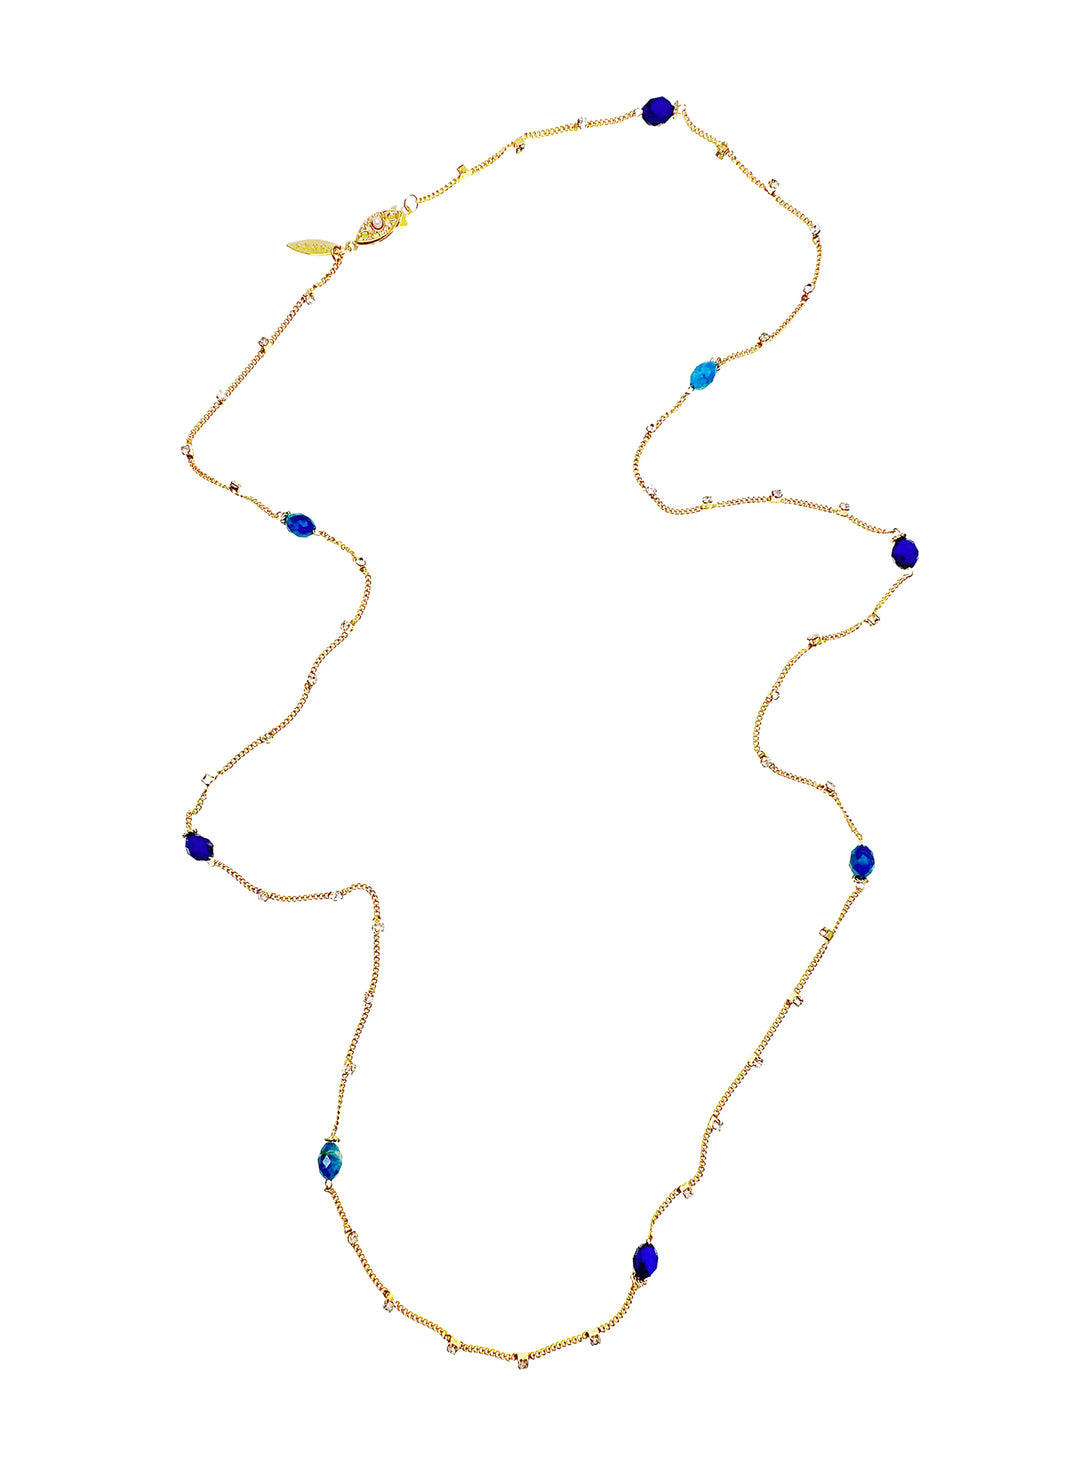 Gold Chain with Blue Gemstone Long Necklace LN032 - FARRA